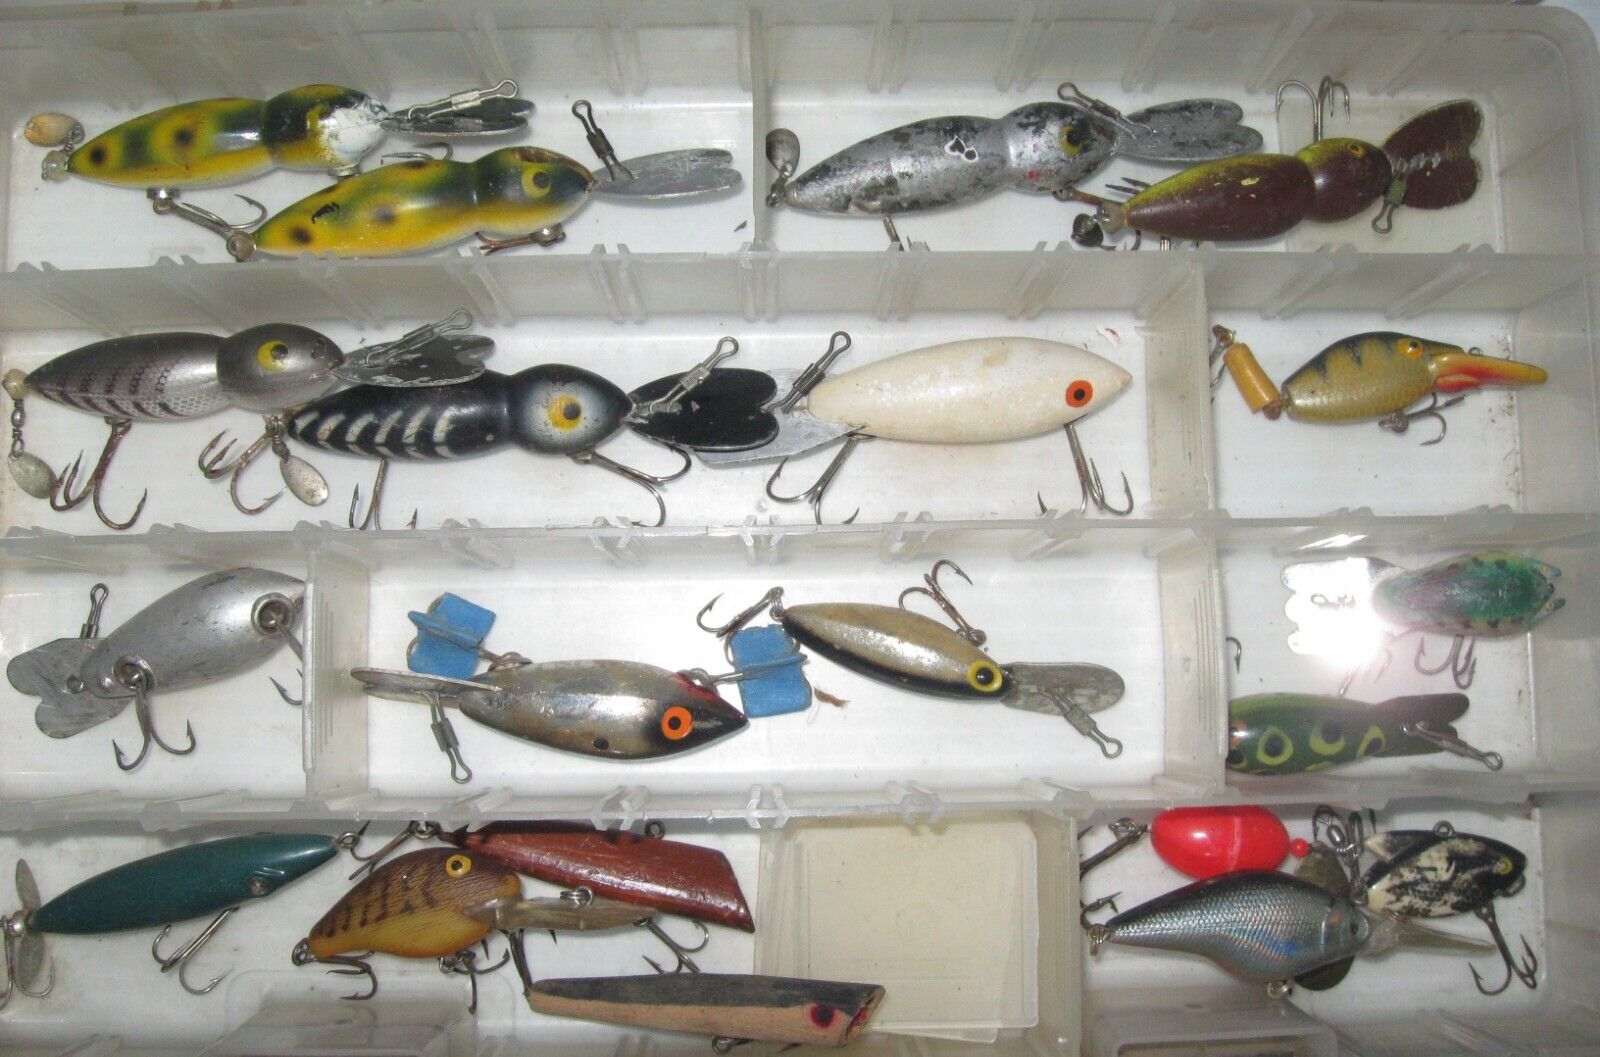 20 MISC. BEATER FISHING LURES  Item # 87